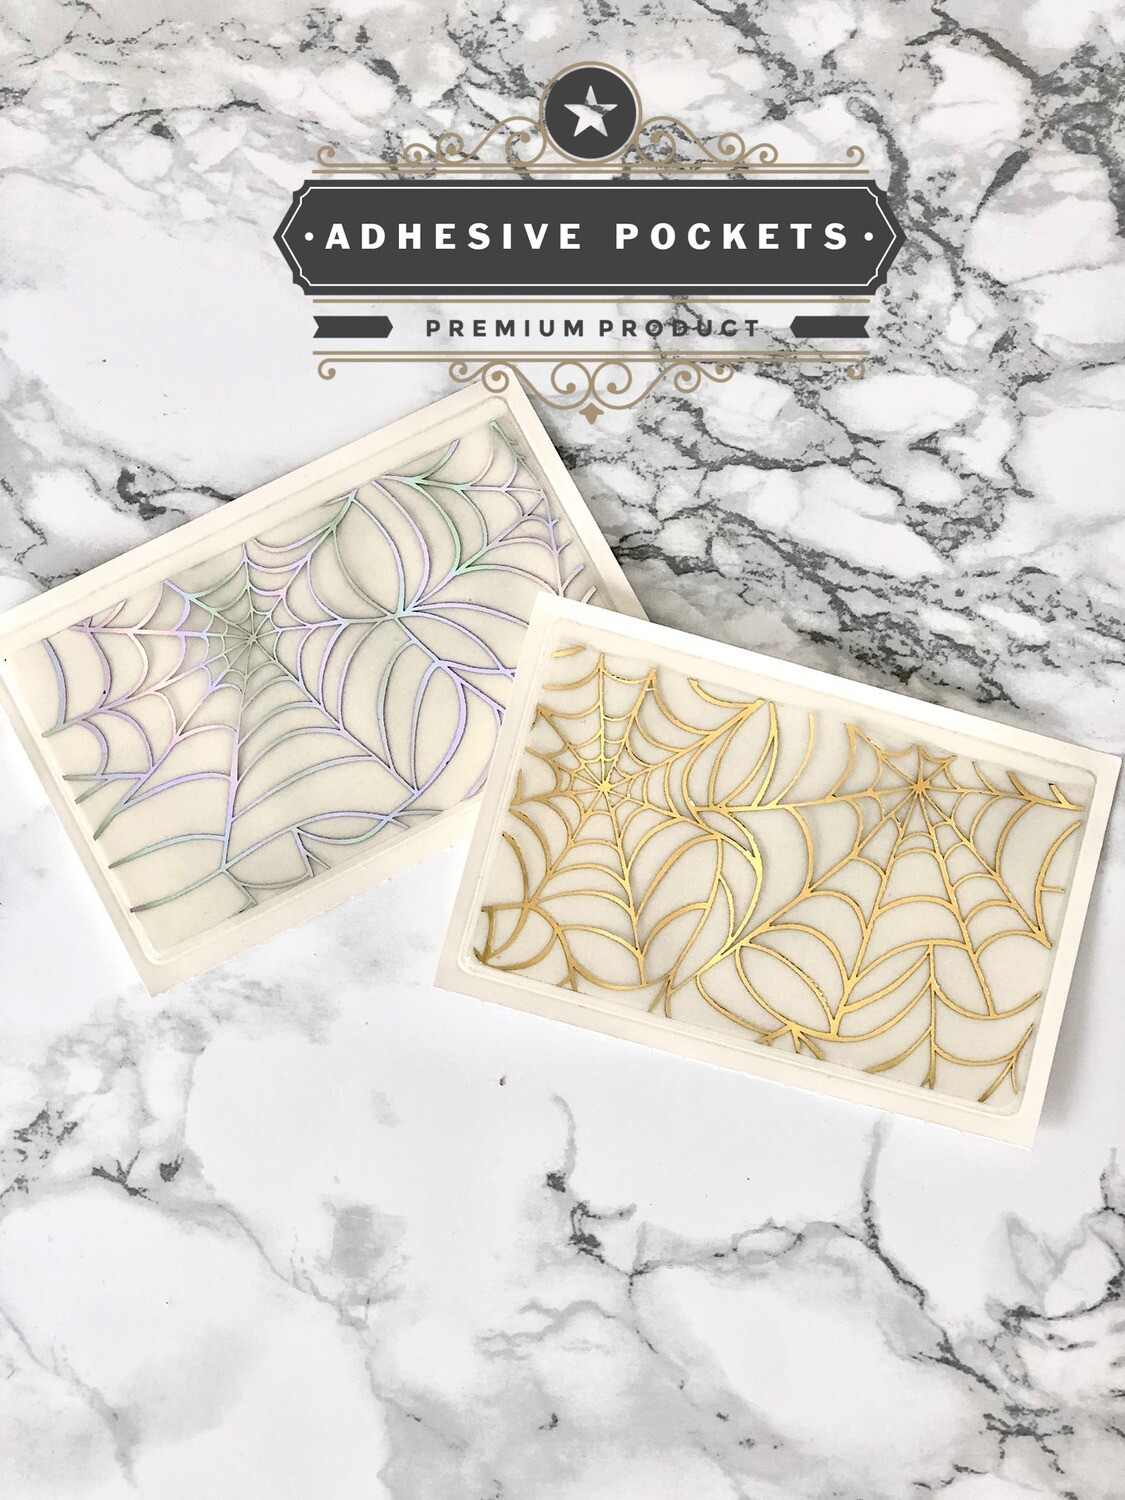 Foiled Cobweb Adhesive Planner Sticker Pockets| Gold Holographic Functional Bujo TN Happy Planner A5